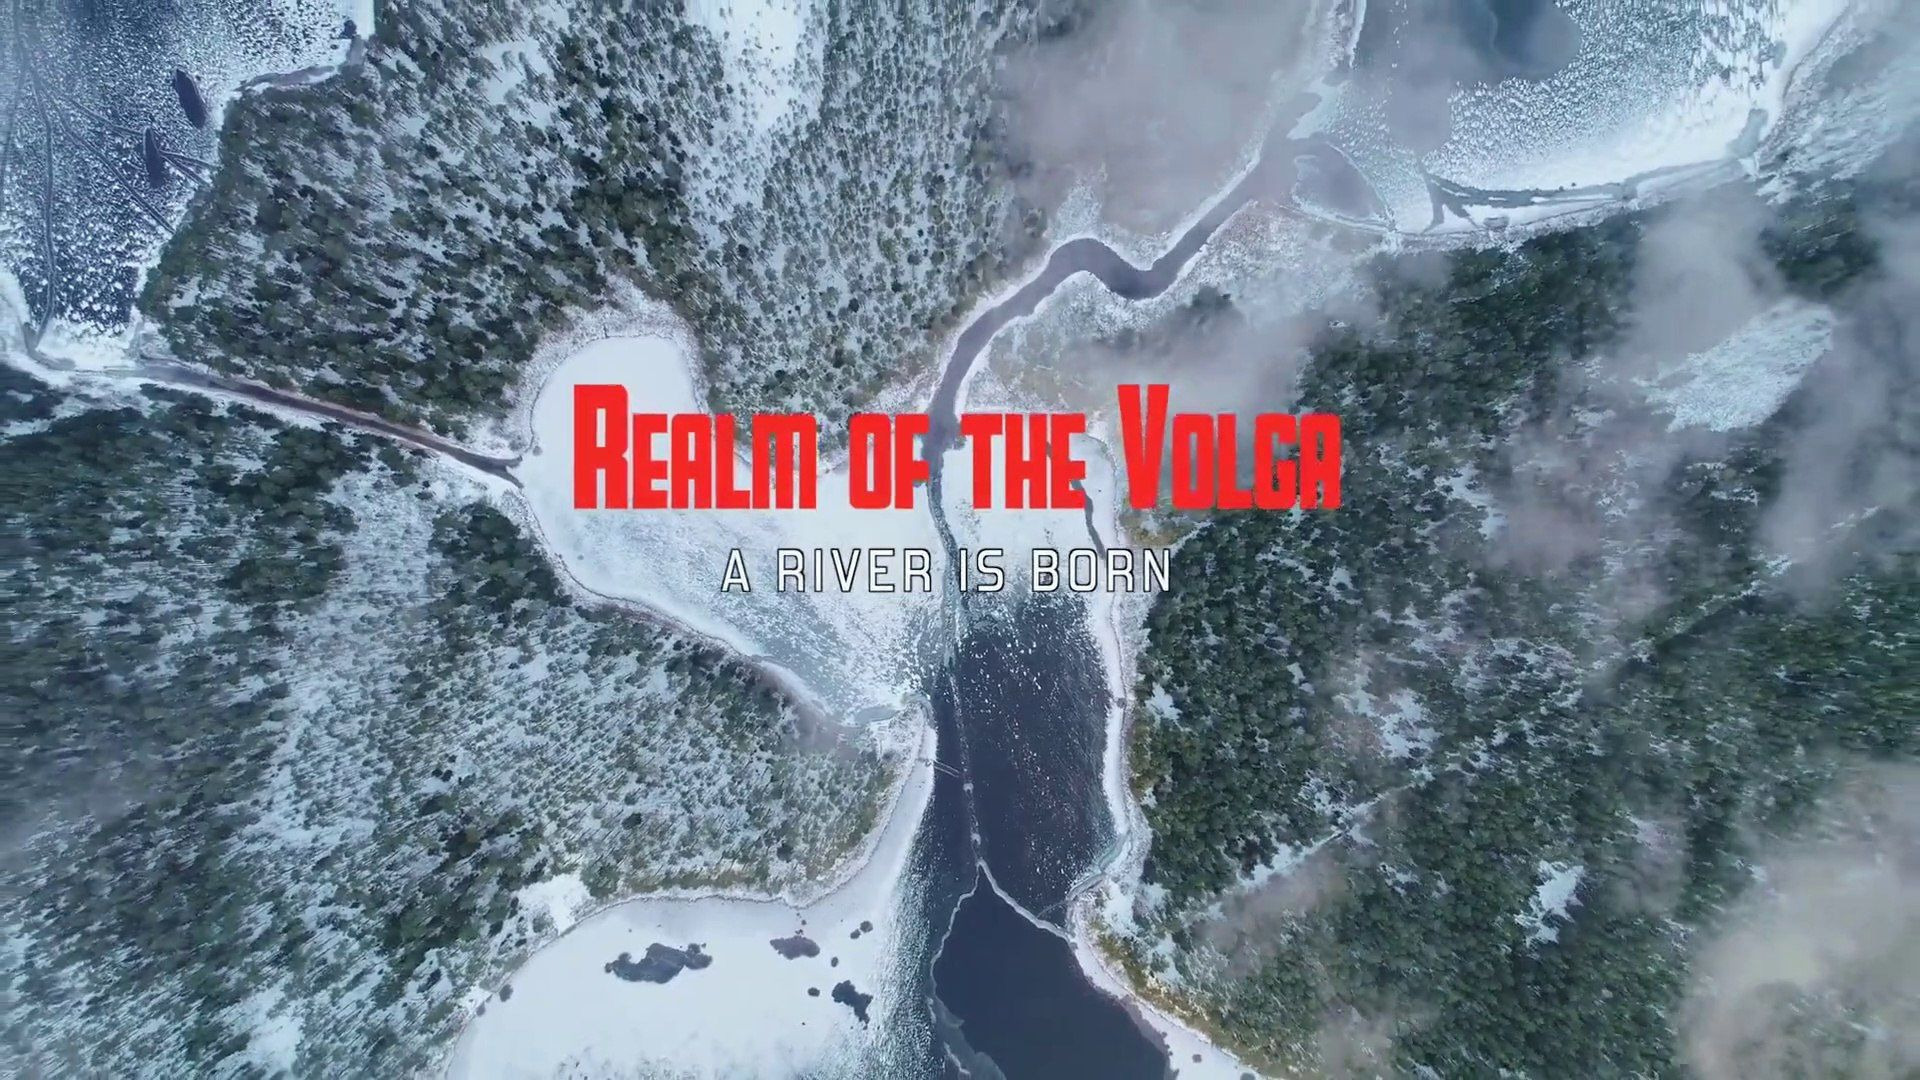 Show Realm of the Volga